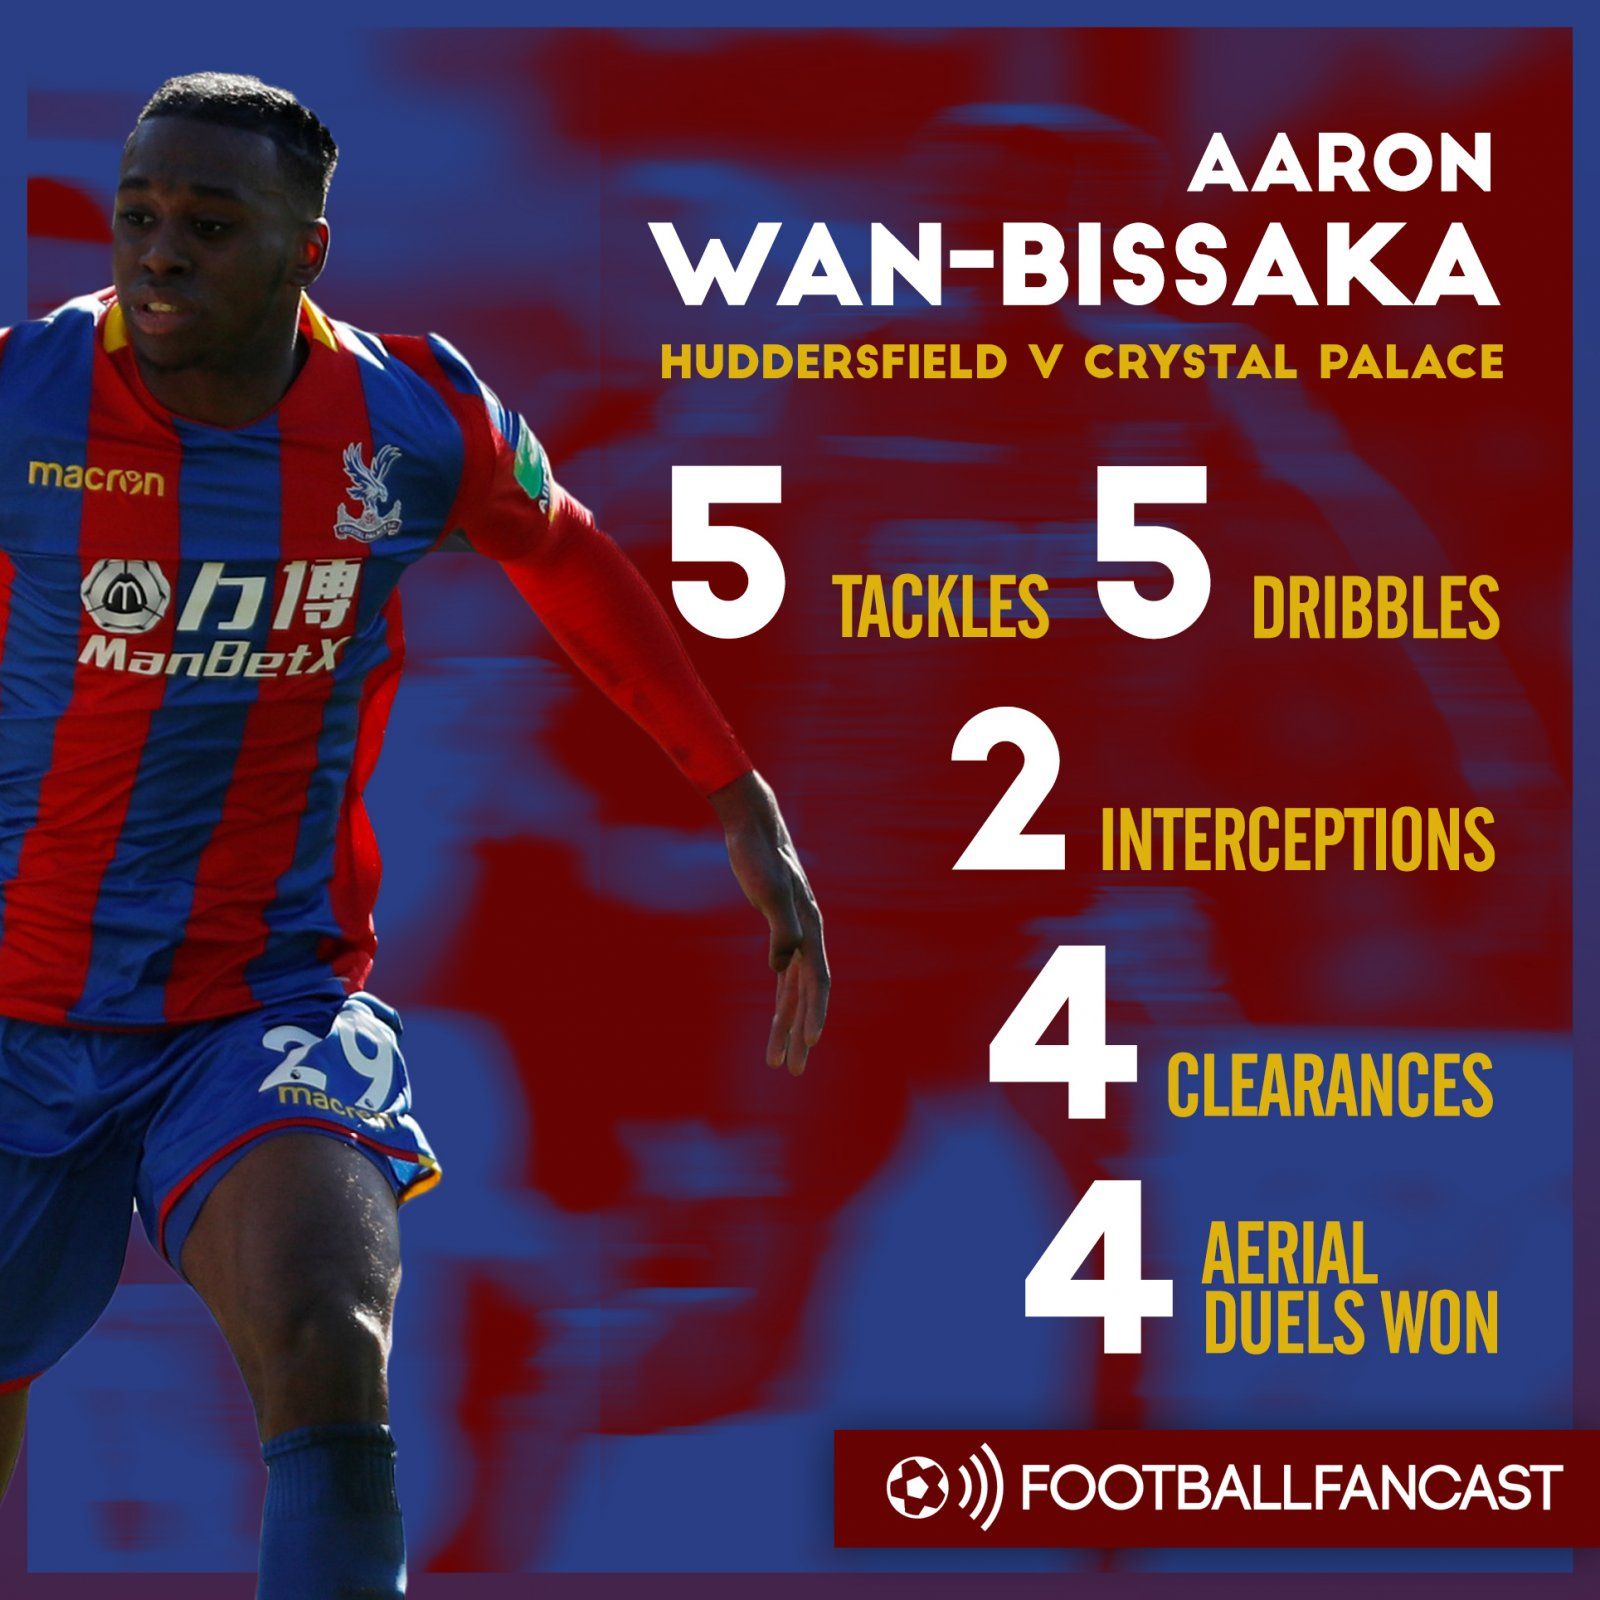 Aaron Wan-Bissaka's stats from 2-0 win over Huddersfield